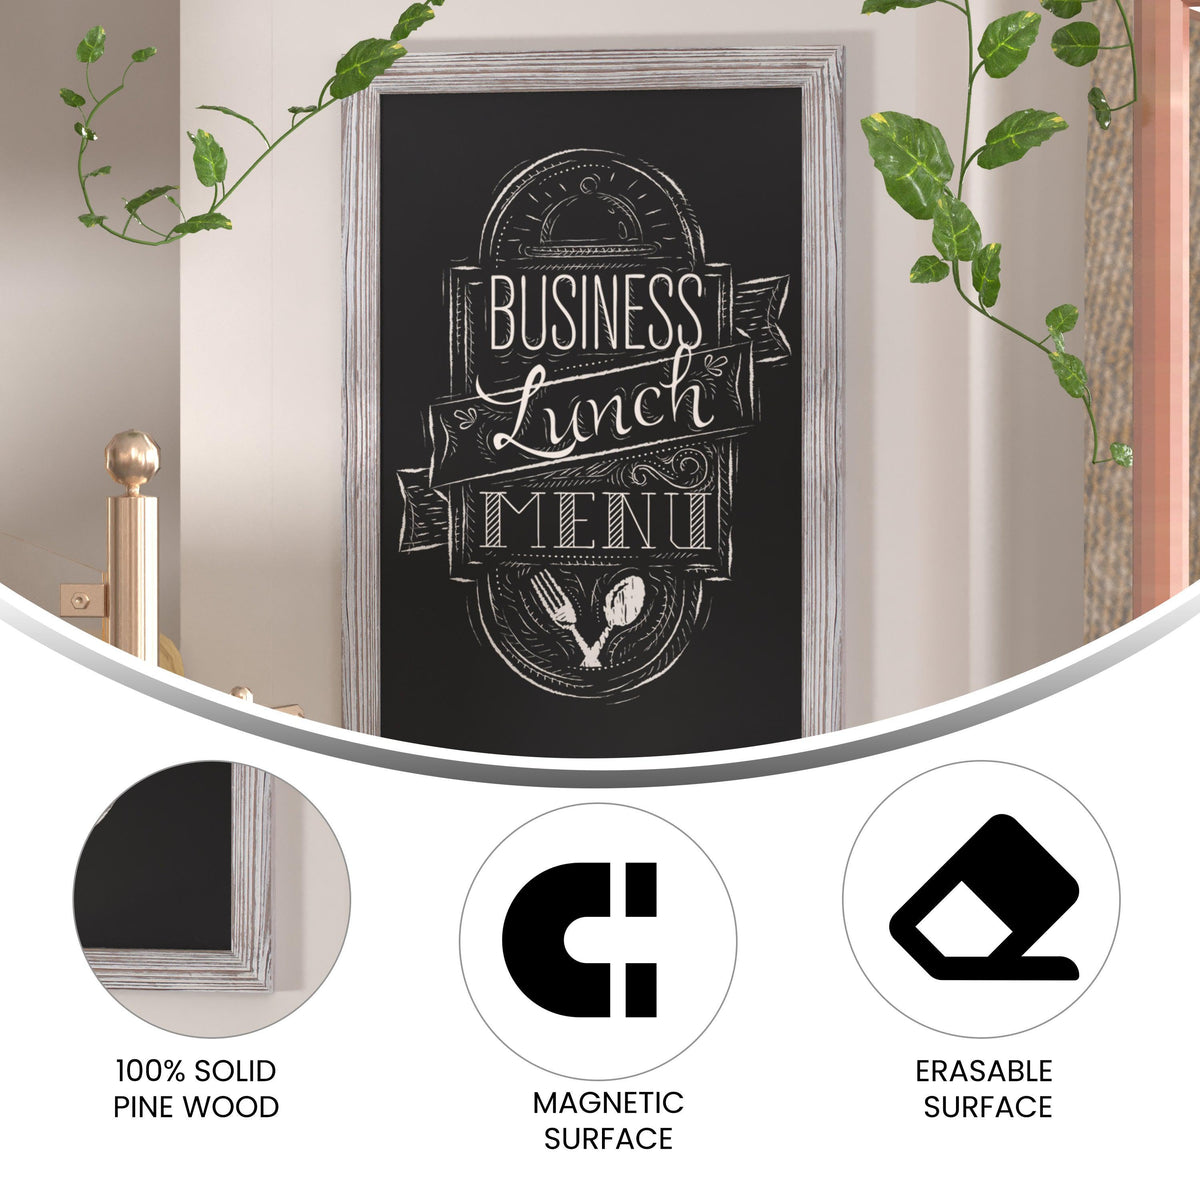 White Washed,24inchW x 0.75inchD x 36inchH |#| 24inch x 36inch Wall Mounted Magnetic Chalkboard with Wooden Frame - Whitewashed